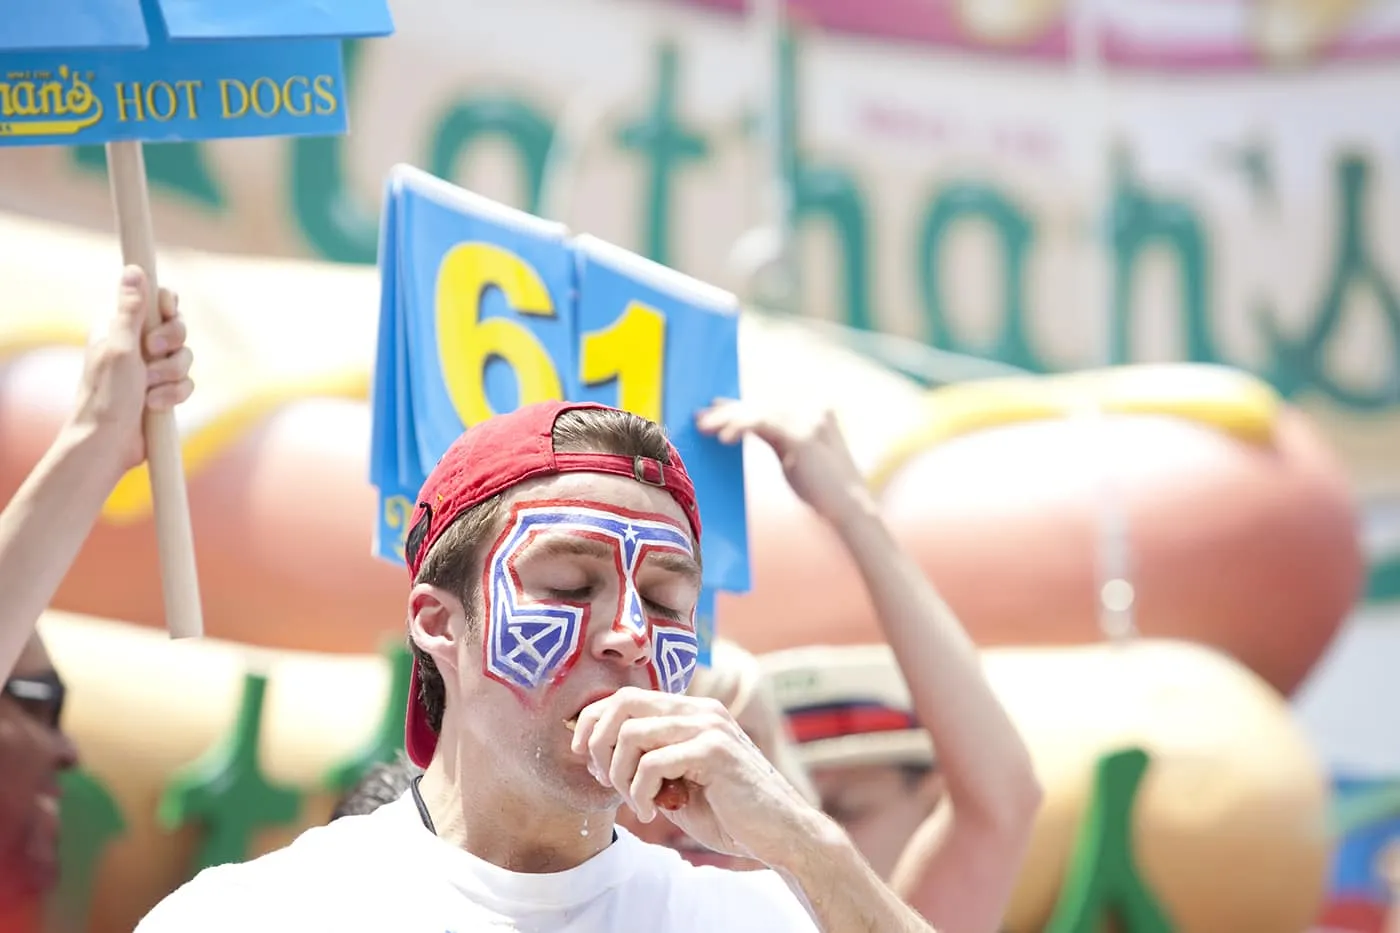 Tim Eater X Janus at the July 4th Coney Island Hot Dog Eating Contest